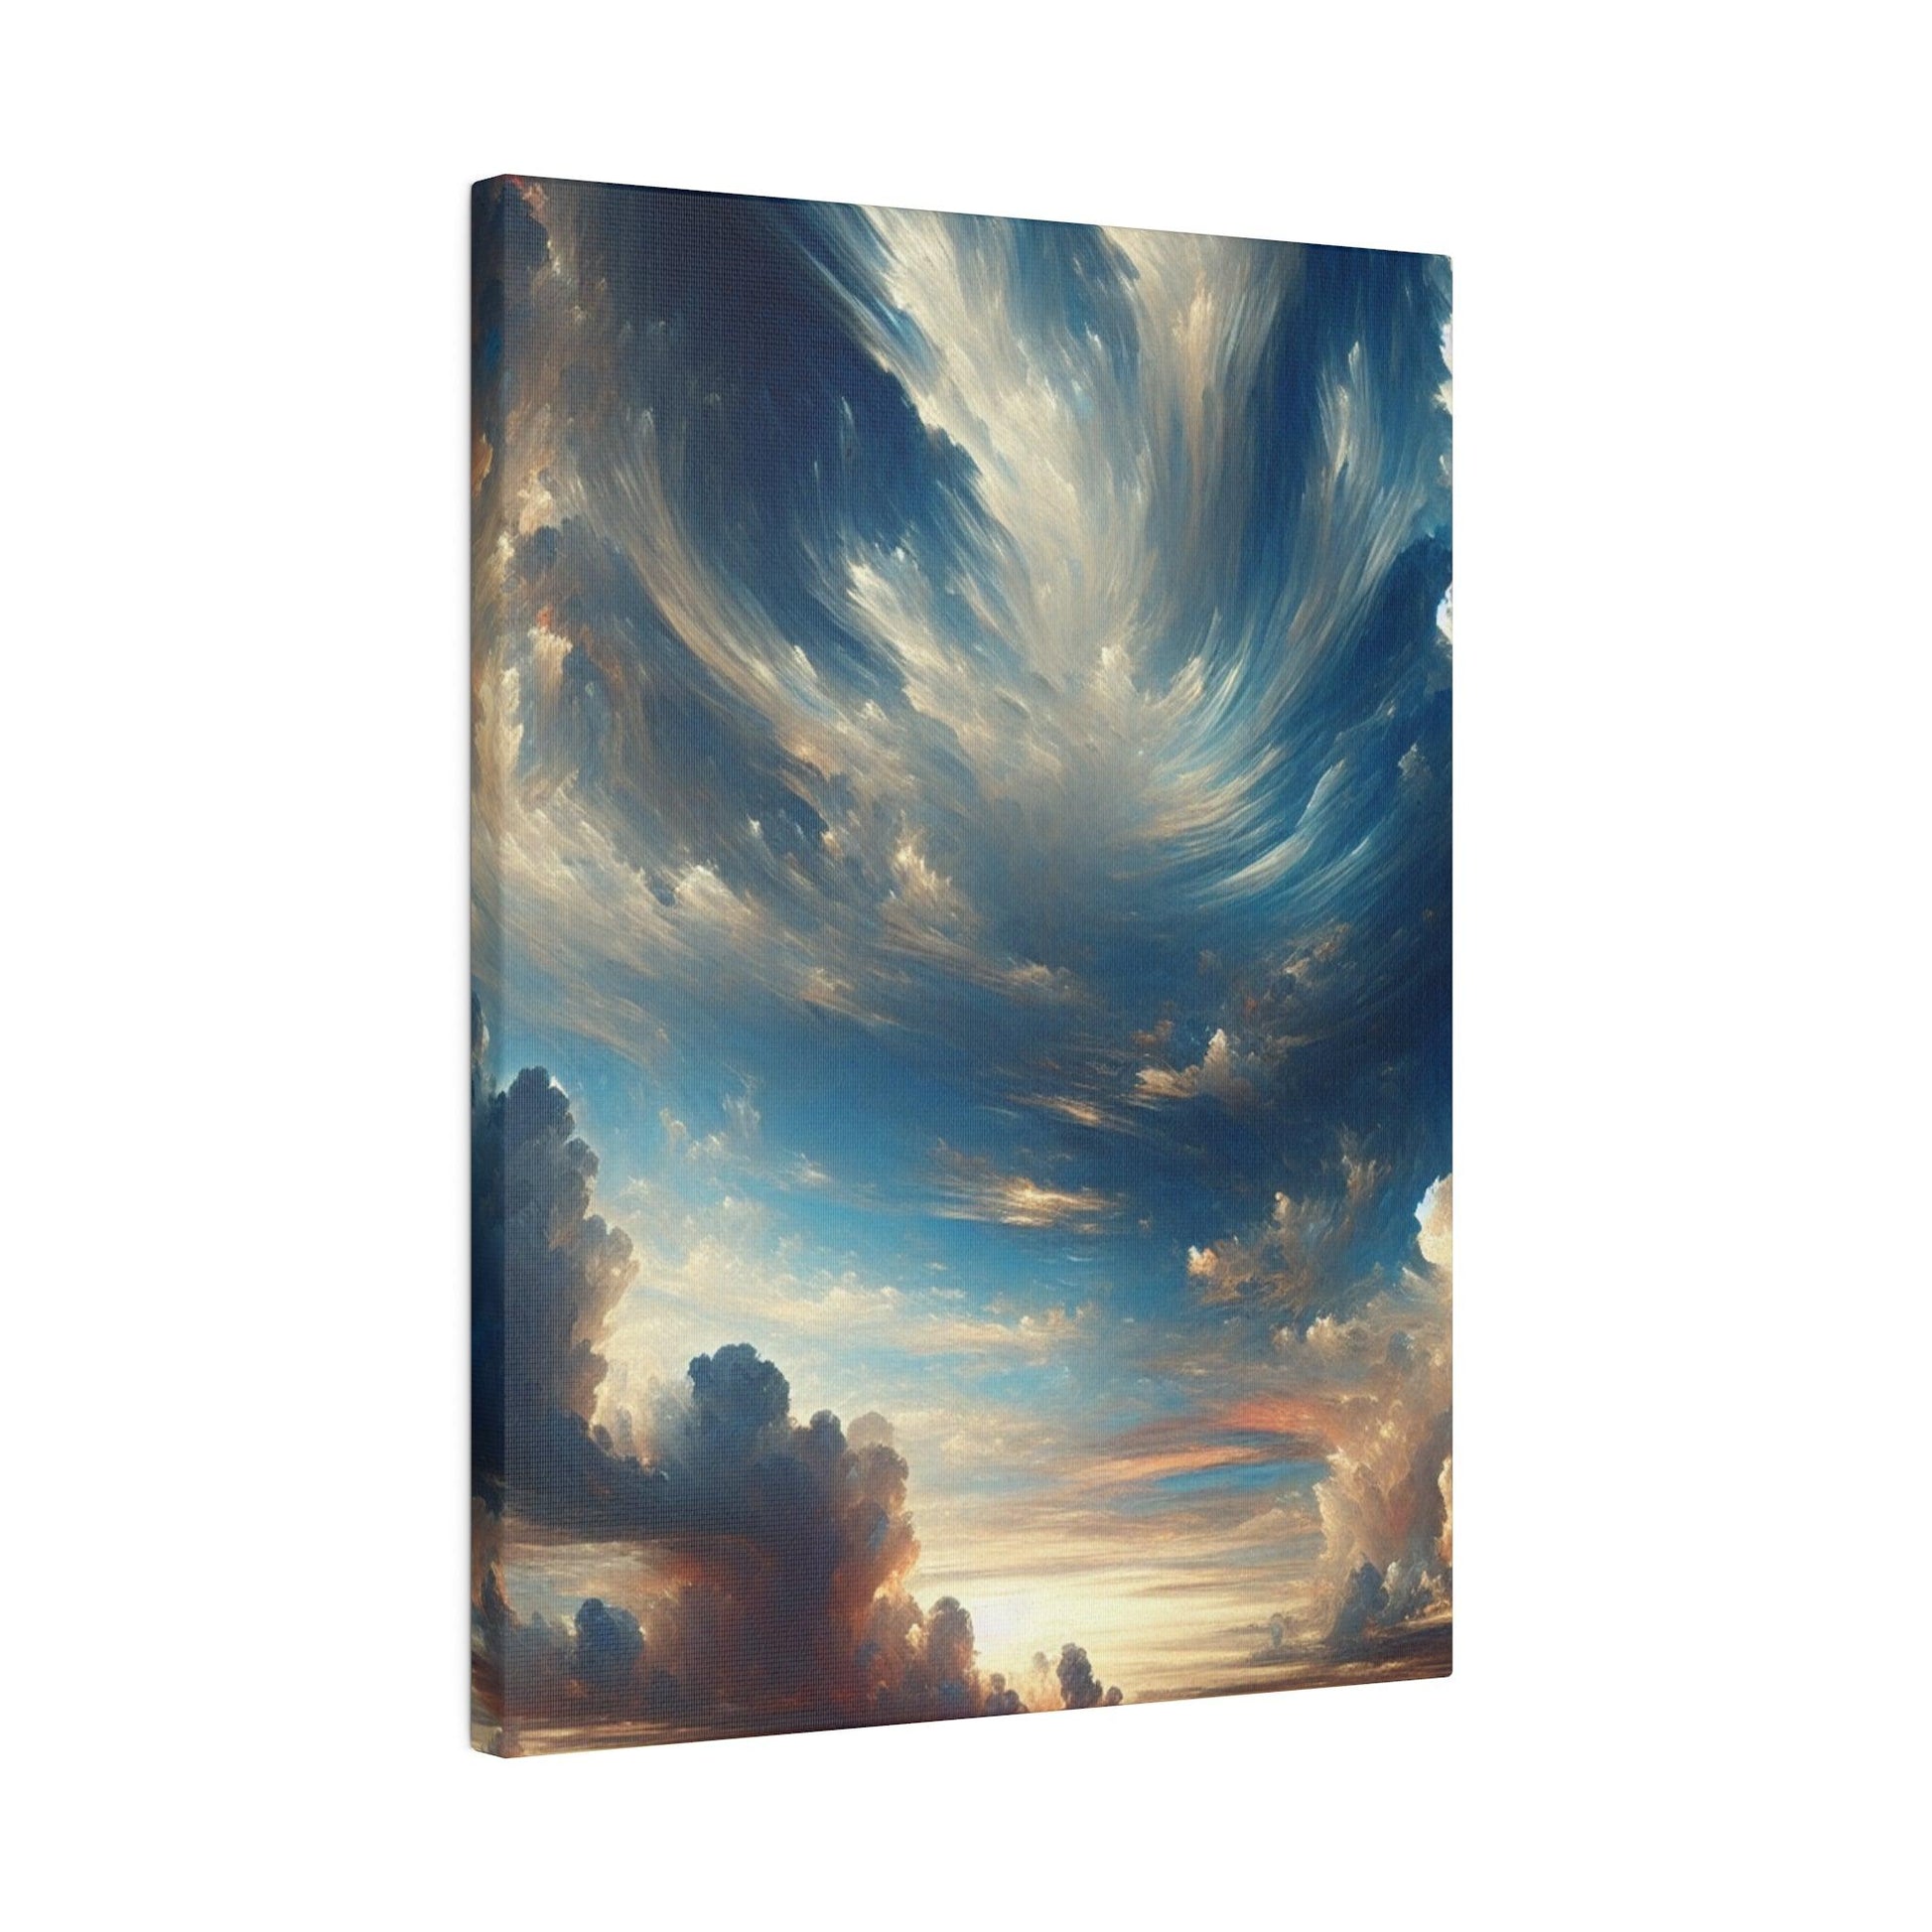 "Clouded Cascades: A Serene Symphony in Sky" - The Alice Gallery